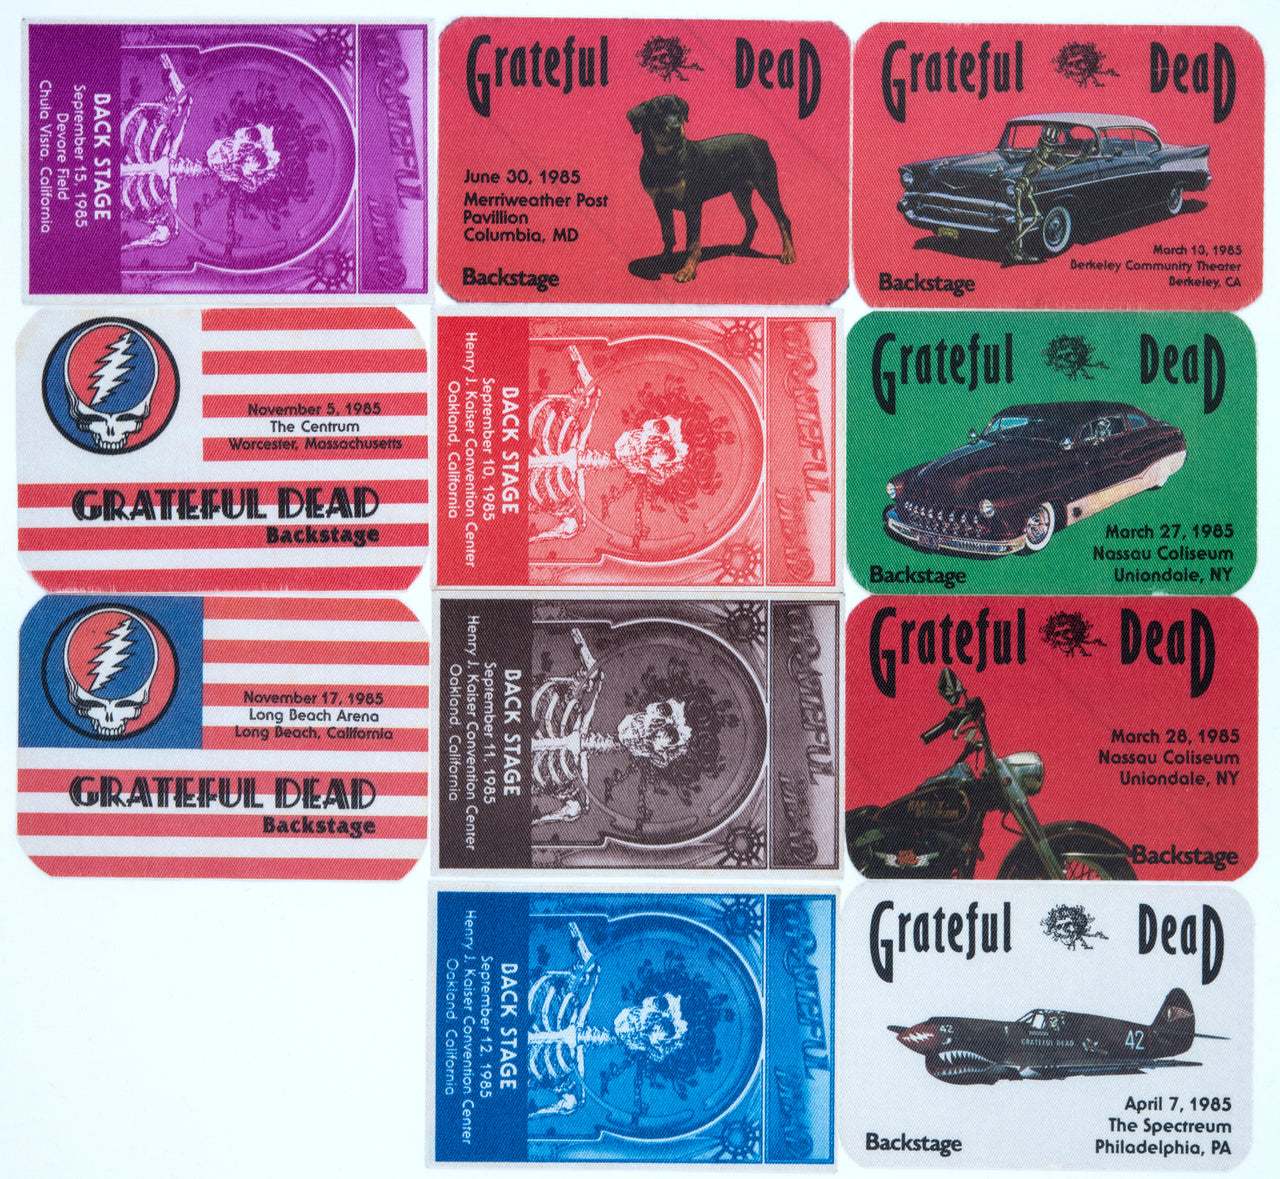 Grateful Dead Backstage Passes (3/13/1985 - 11/17/1985) from Dan Healy (1)